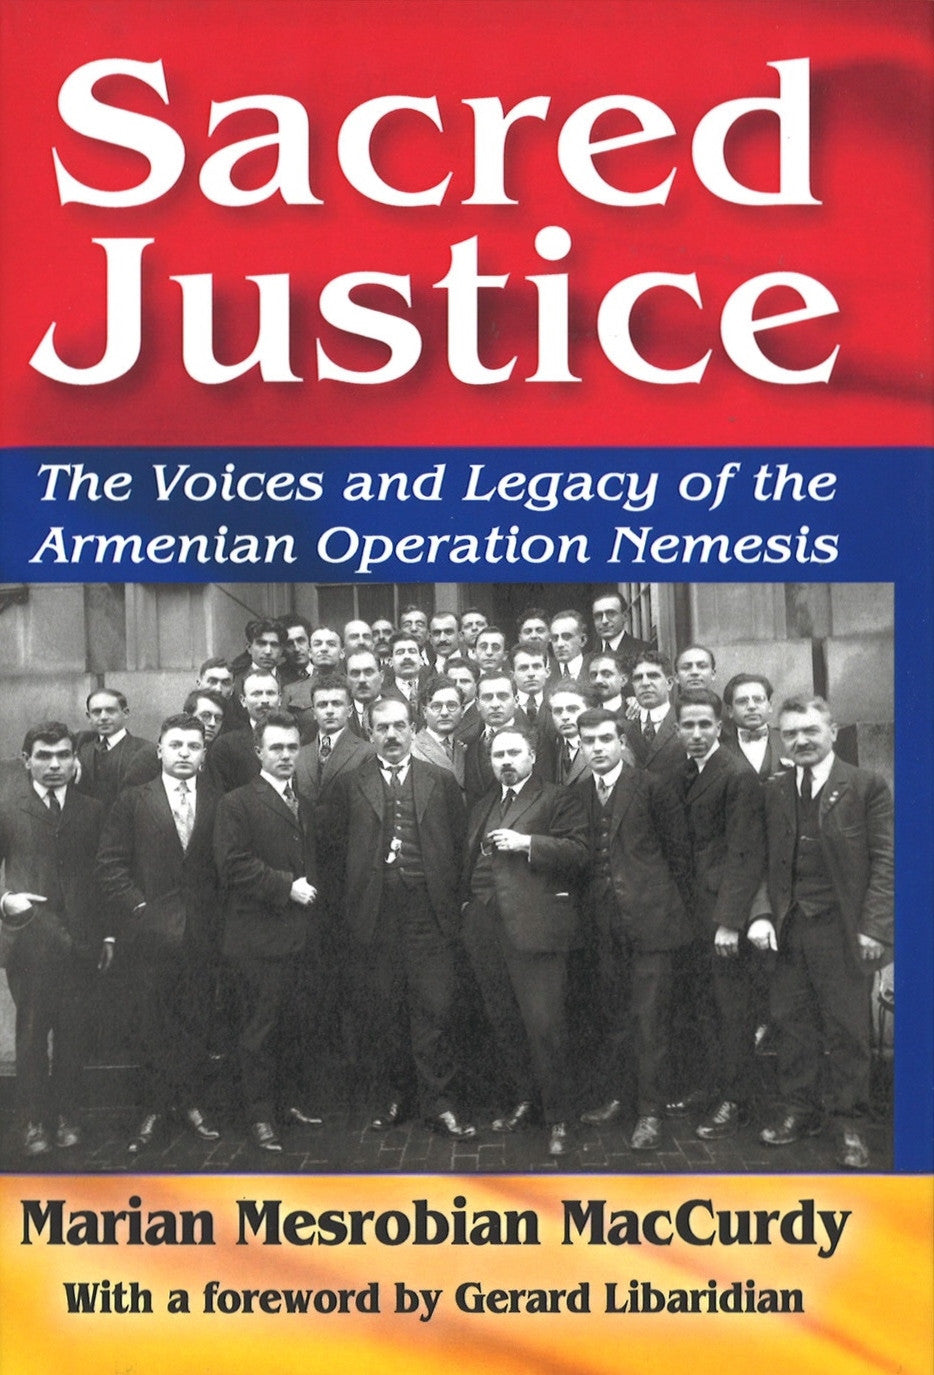 SACRED JUSTICE: The Voices and Legacy of the Armenian Operation Nemesis